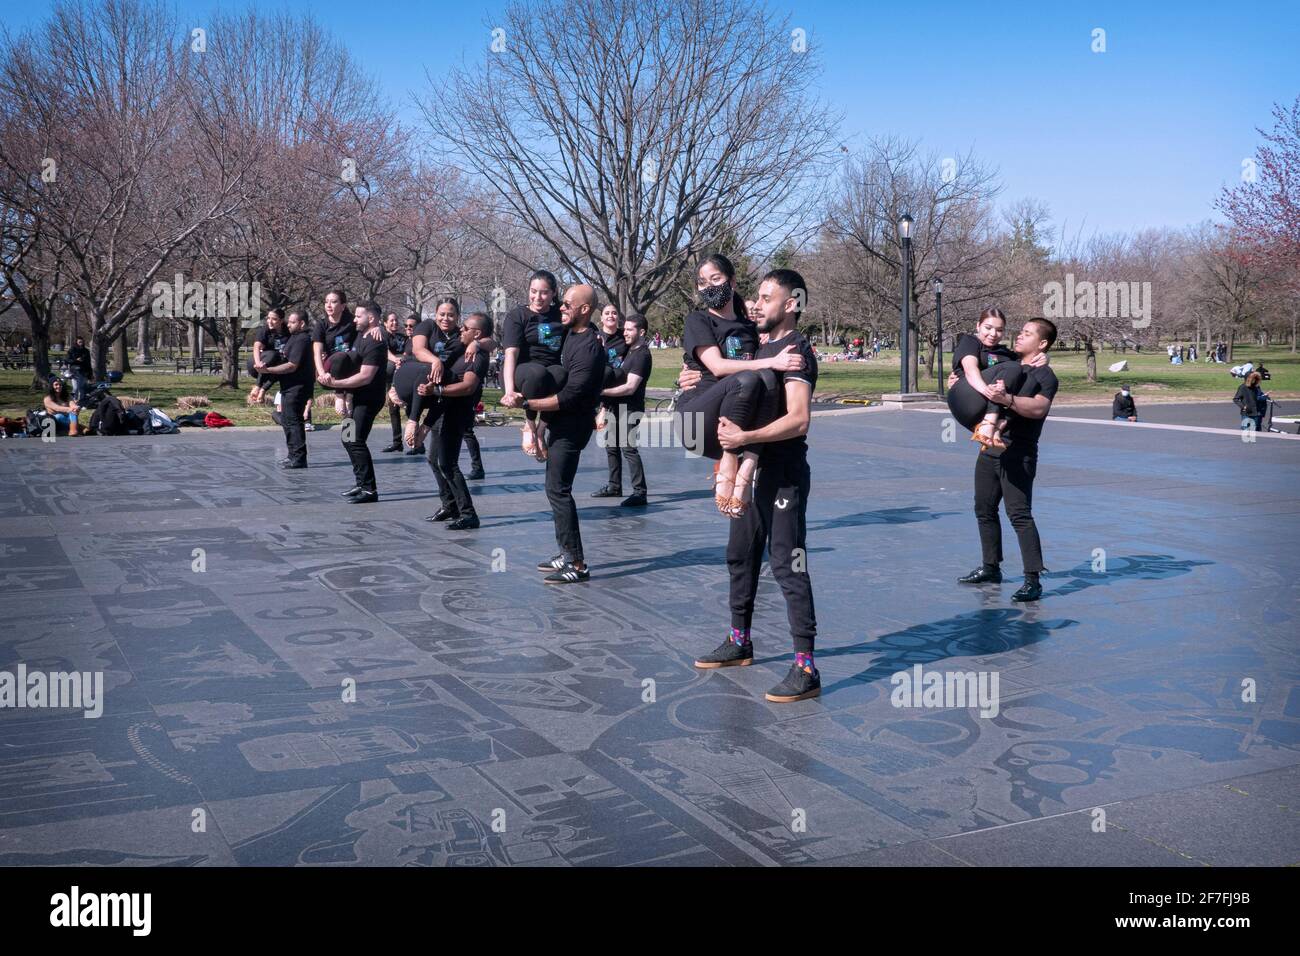 A group from the Cali Salsa Pal Mundo dance studio perform in public to publicize their school. In Flushing Meadows Corona Park in Queens, NYC. Stock Photo